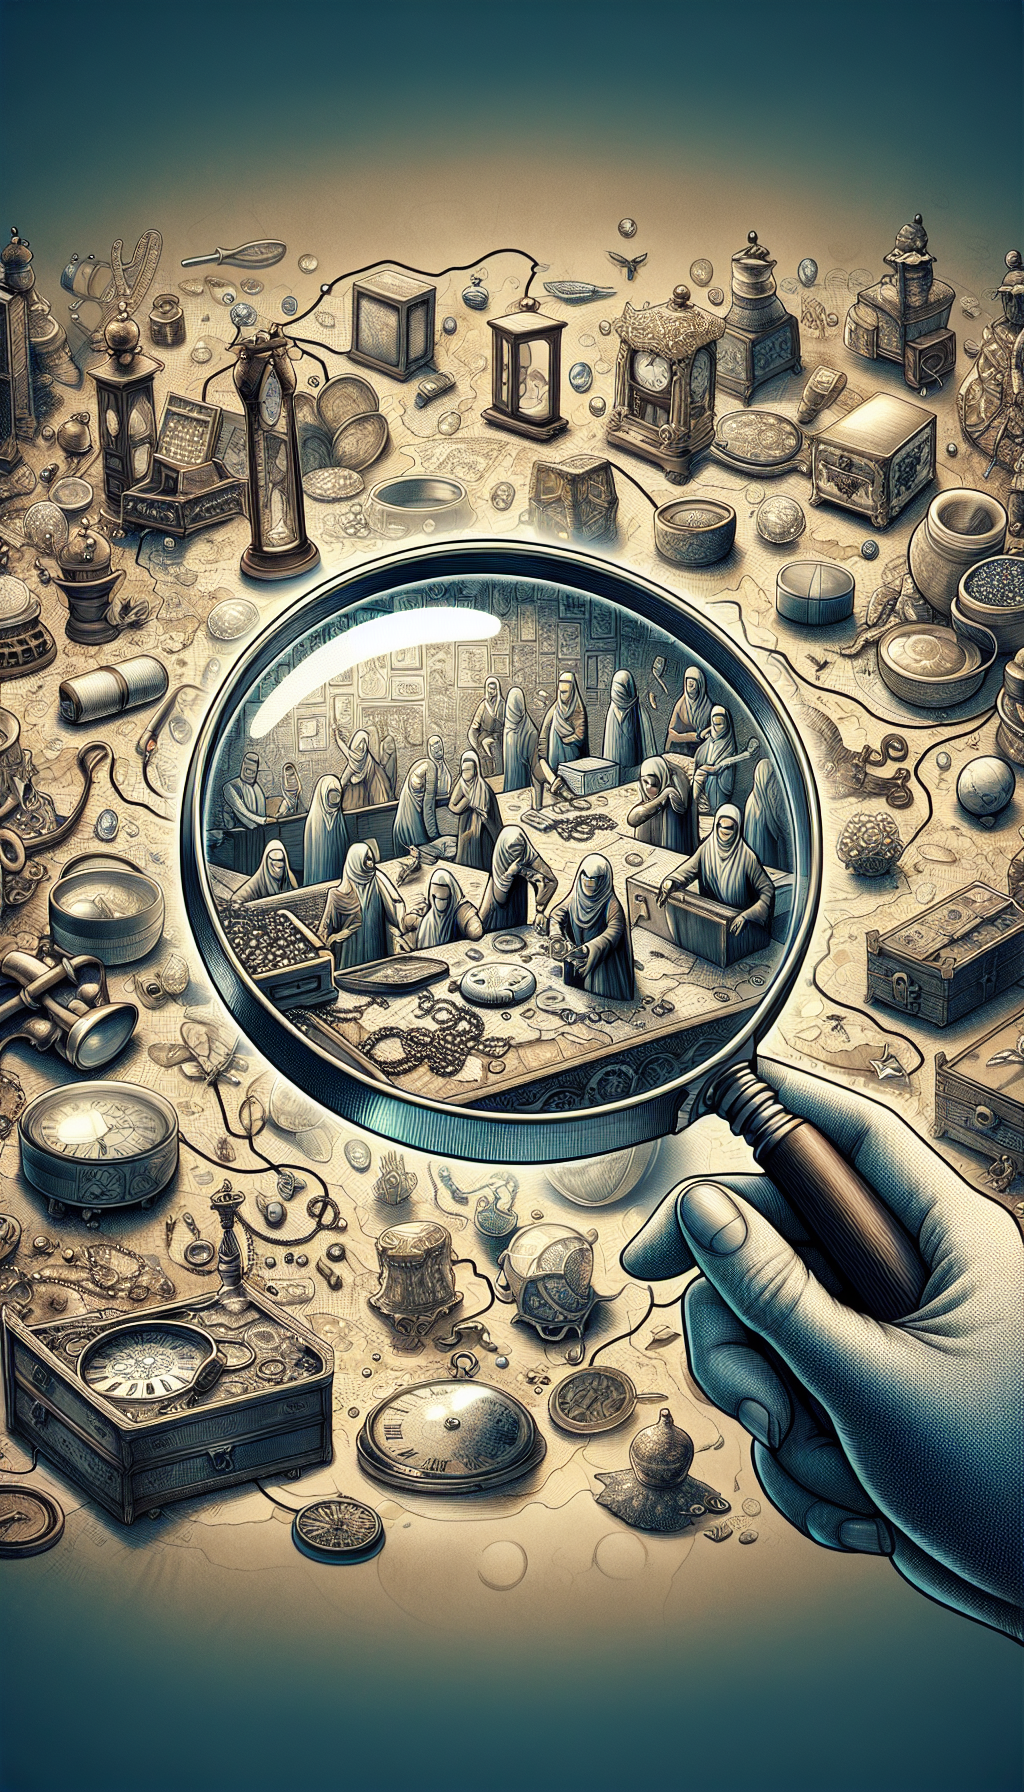 An illustration depicting a magnifying glass hovering over a cluttered treasure map, with key landmarks in the form of antiques like a grandfather clock or a vintage jewelry box, each emitting a faint glow. Within the magnifying glass, local antique appraisers are sketched in a detailed, realistic style, analyzing a piece, contrasting with the rest of the map's whimsical, cartoonish aesthetic.